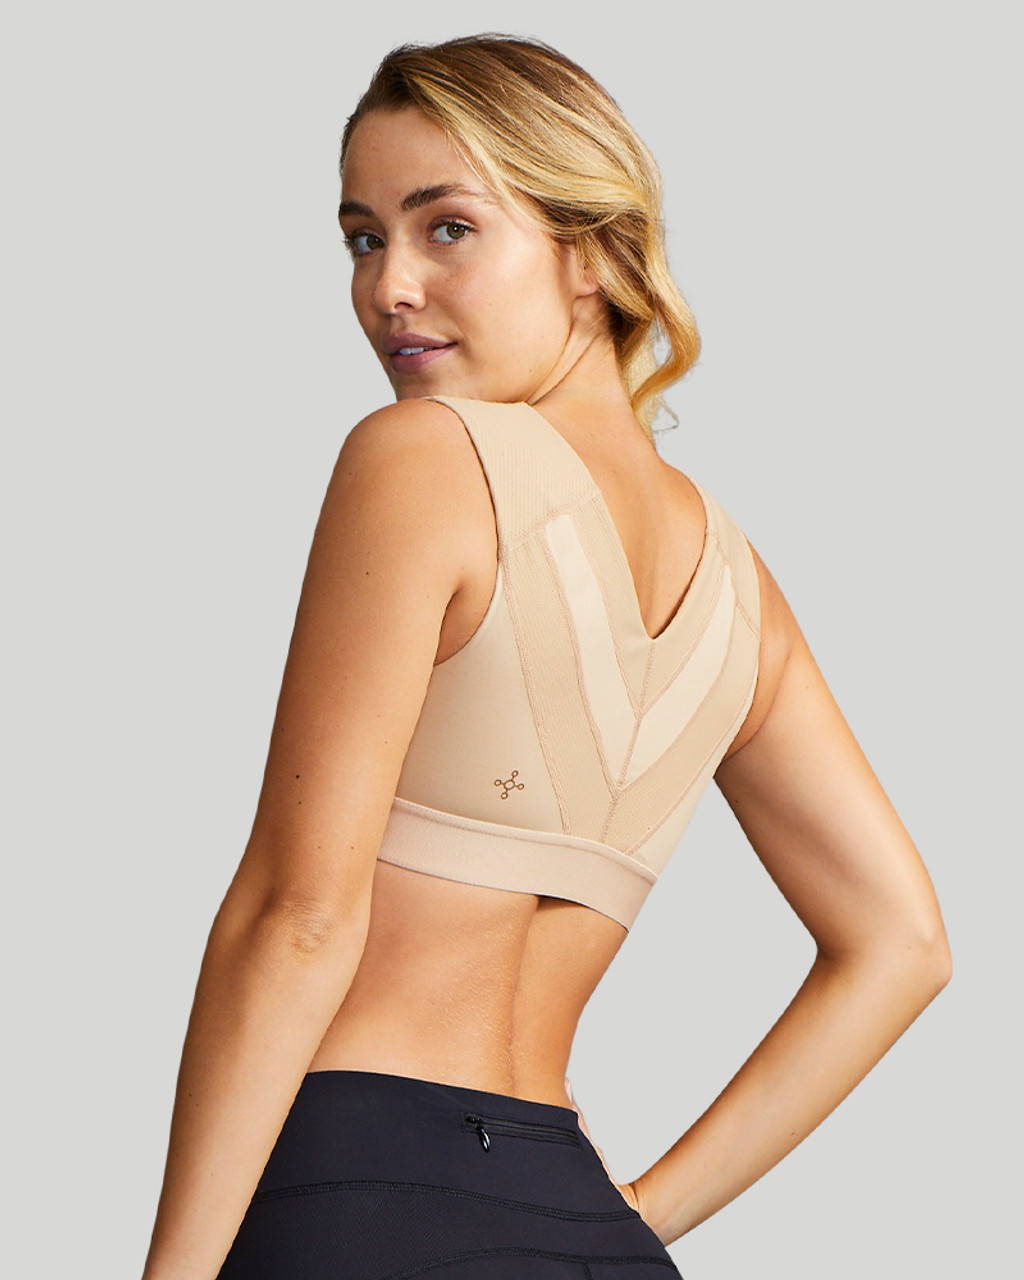 A woman wearing a natural Tommie Copper Shoulder Support Bra